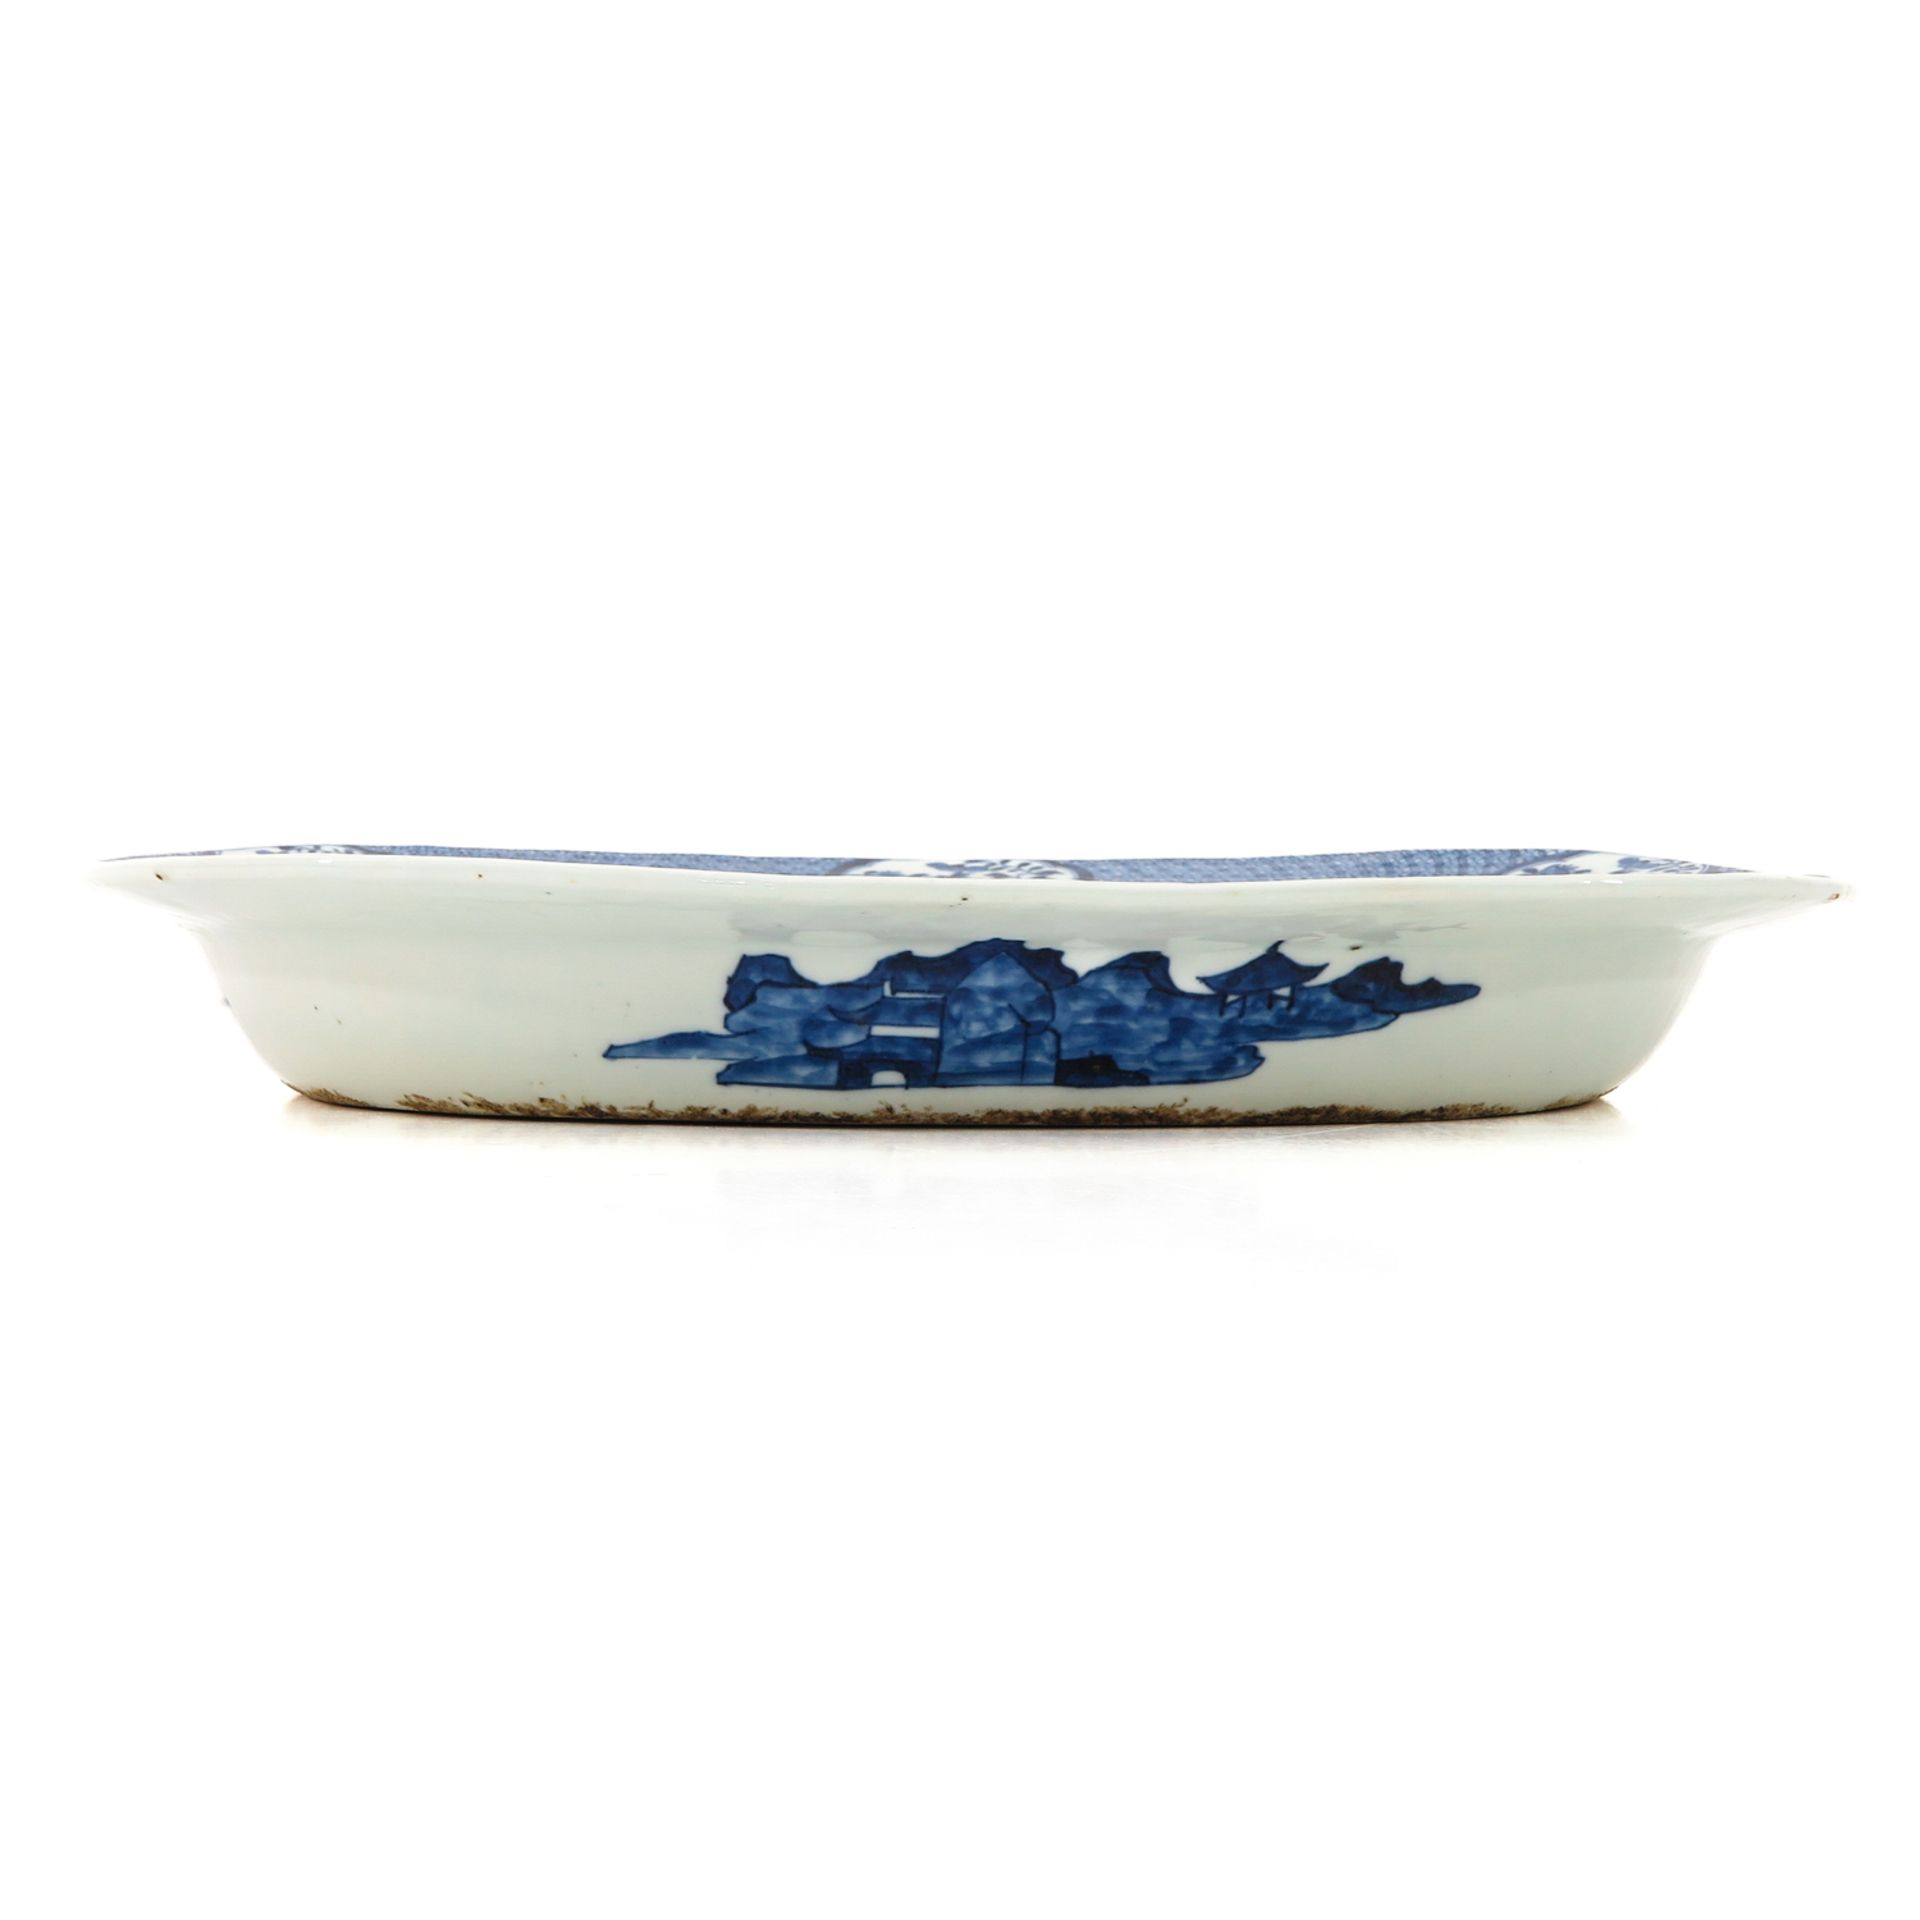 A Blue and White Serving Dish with Strainer - Image 5 of 9